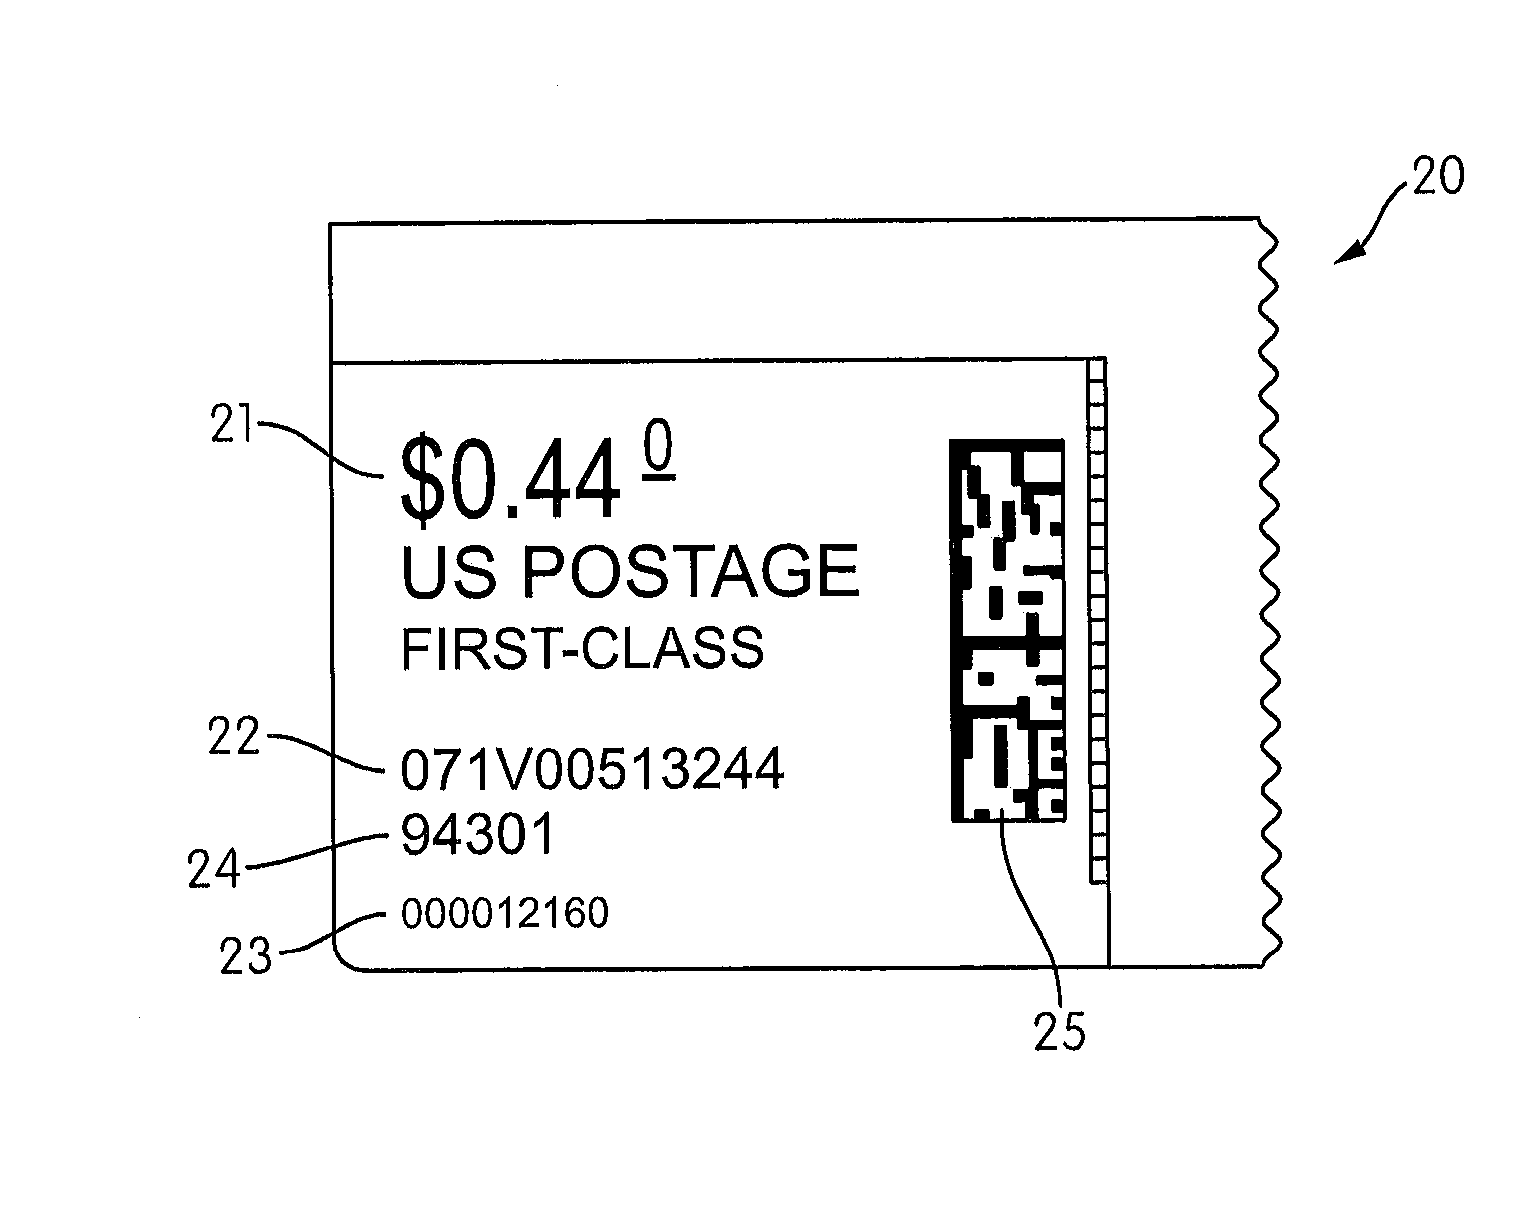 High volume serialized postage at an automated teller machine or other kiosk